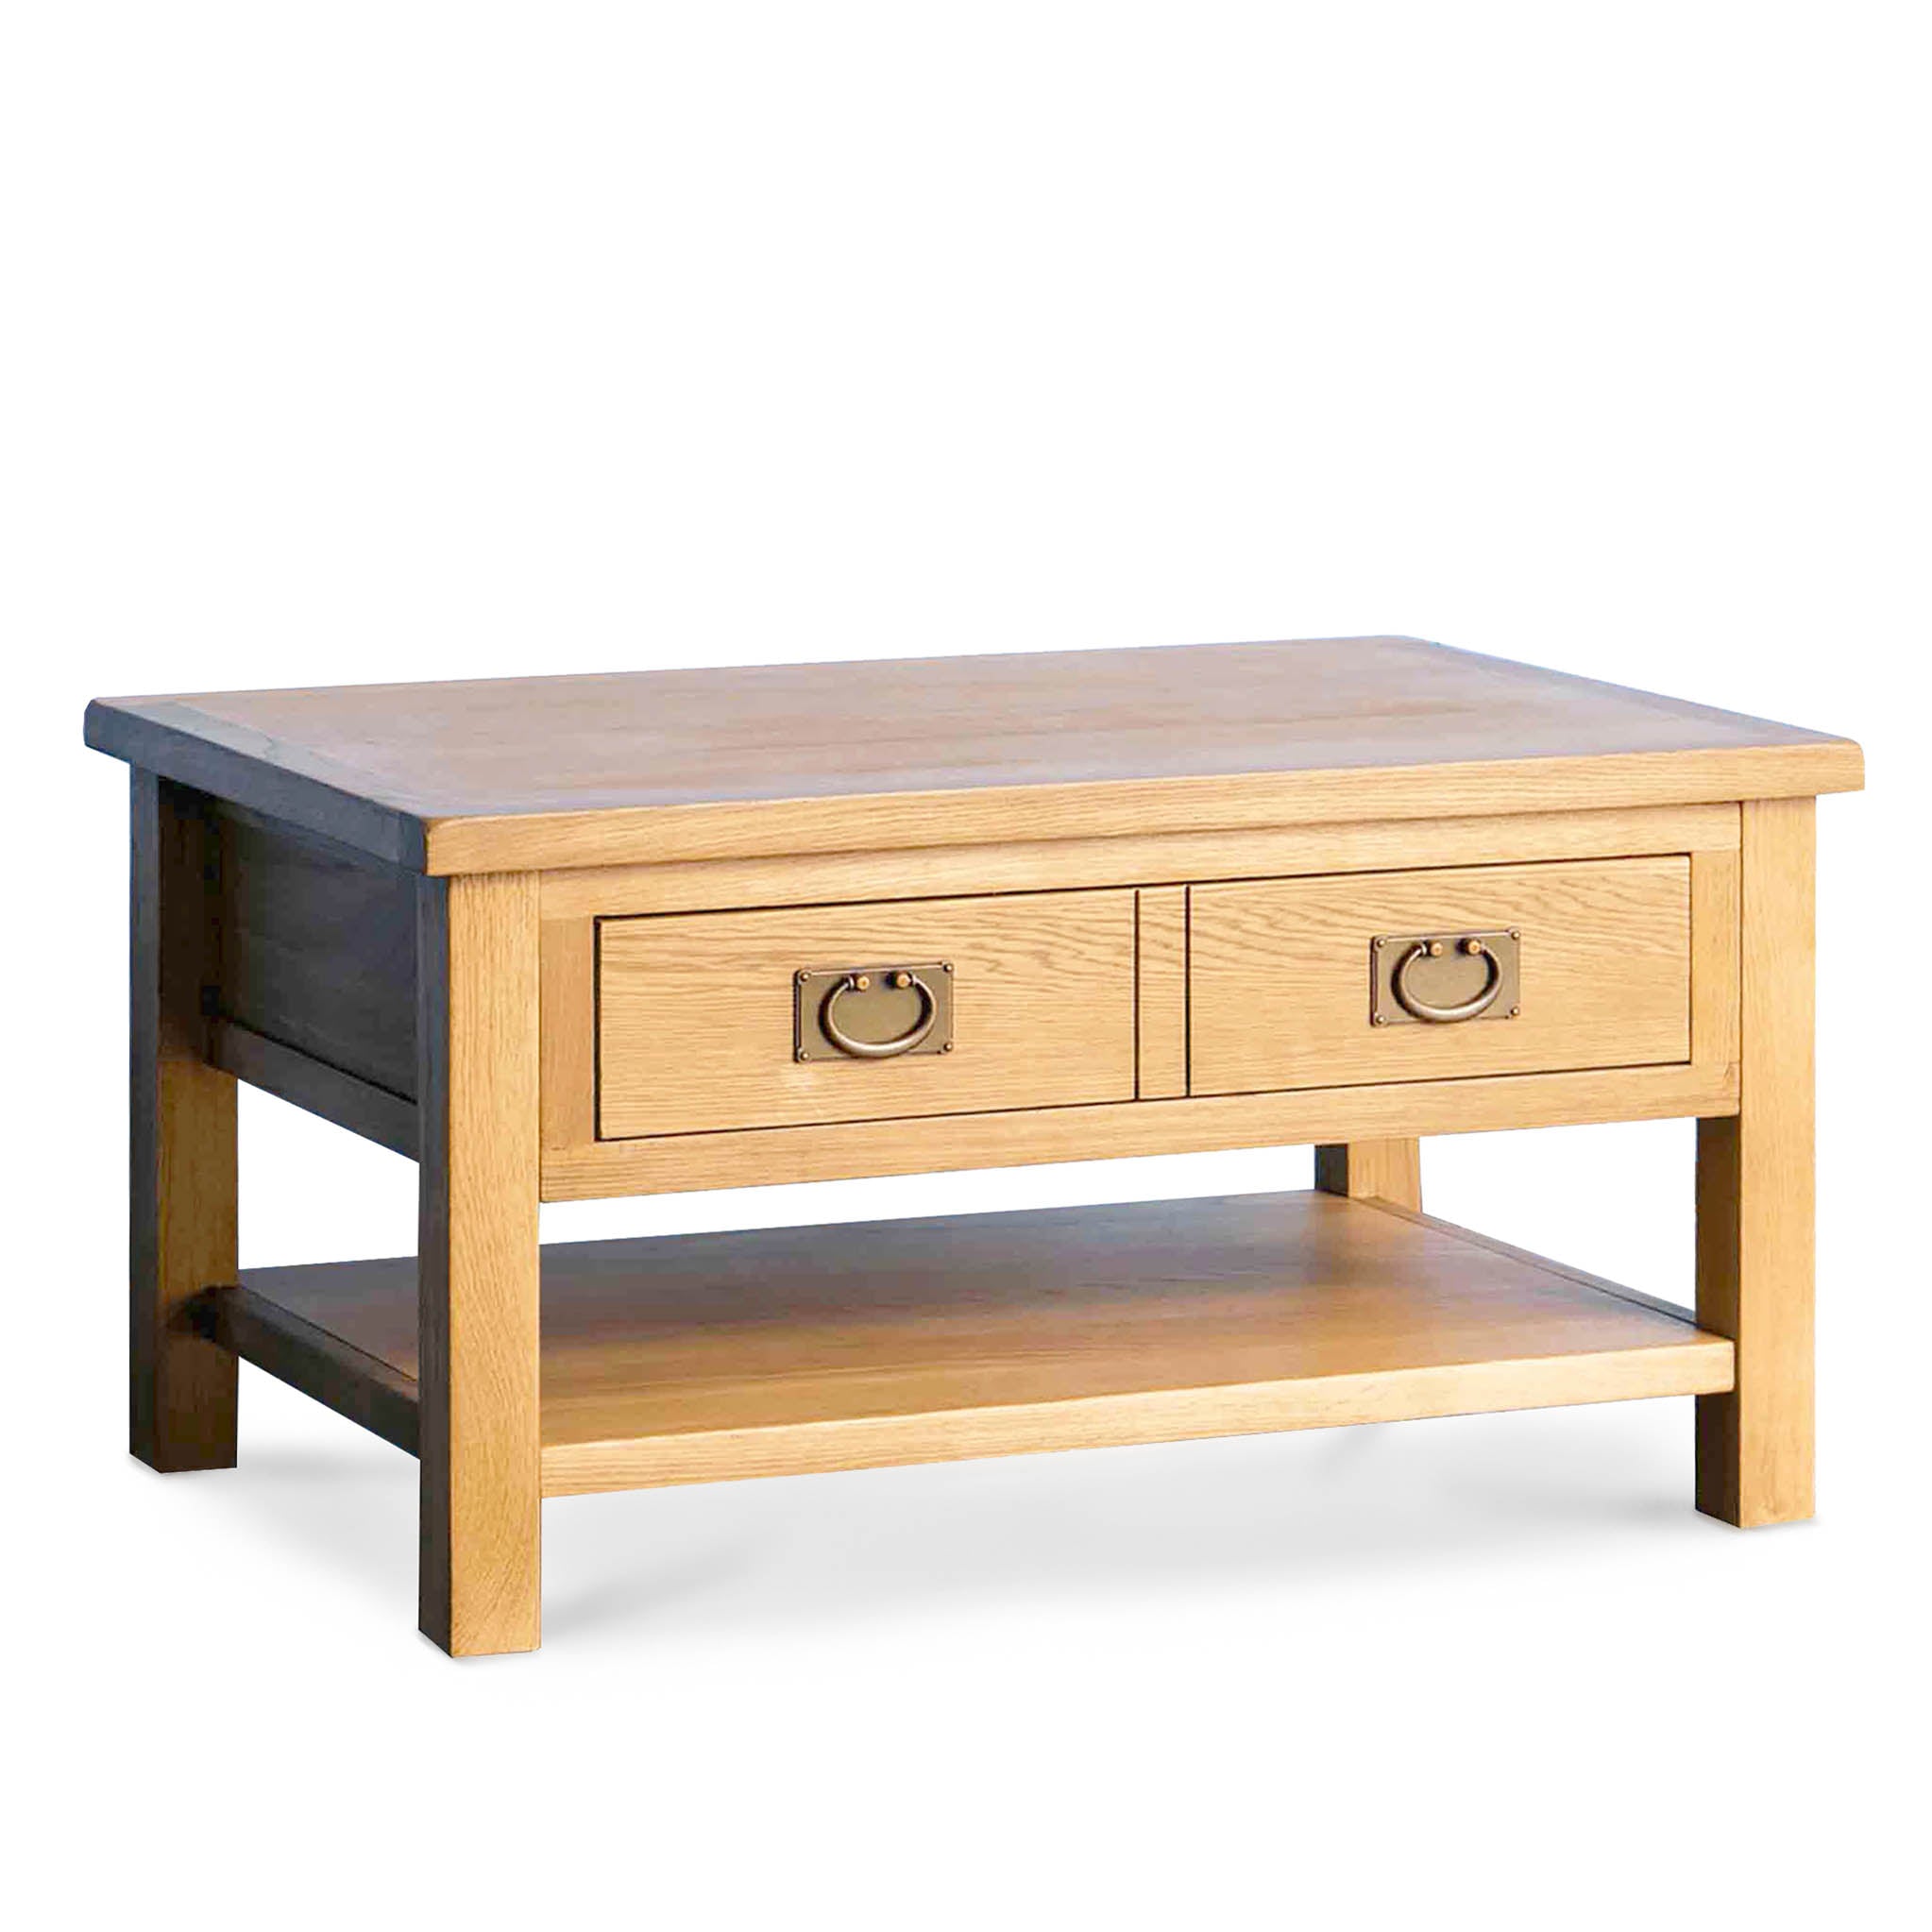 Surrey Oak Coffee Table With Drawer Solid Wood Rustic Waxed Oak